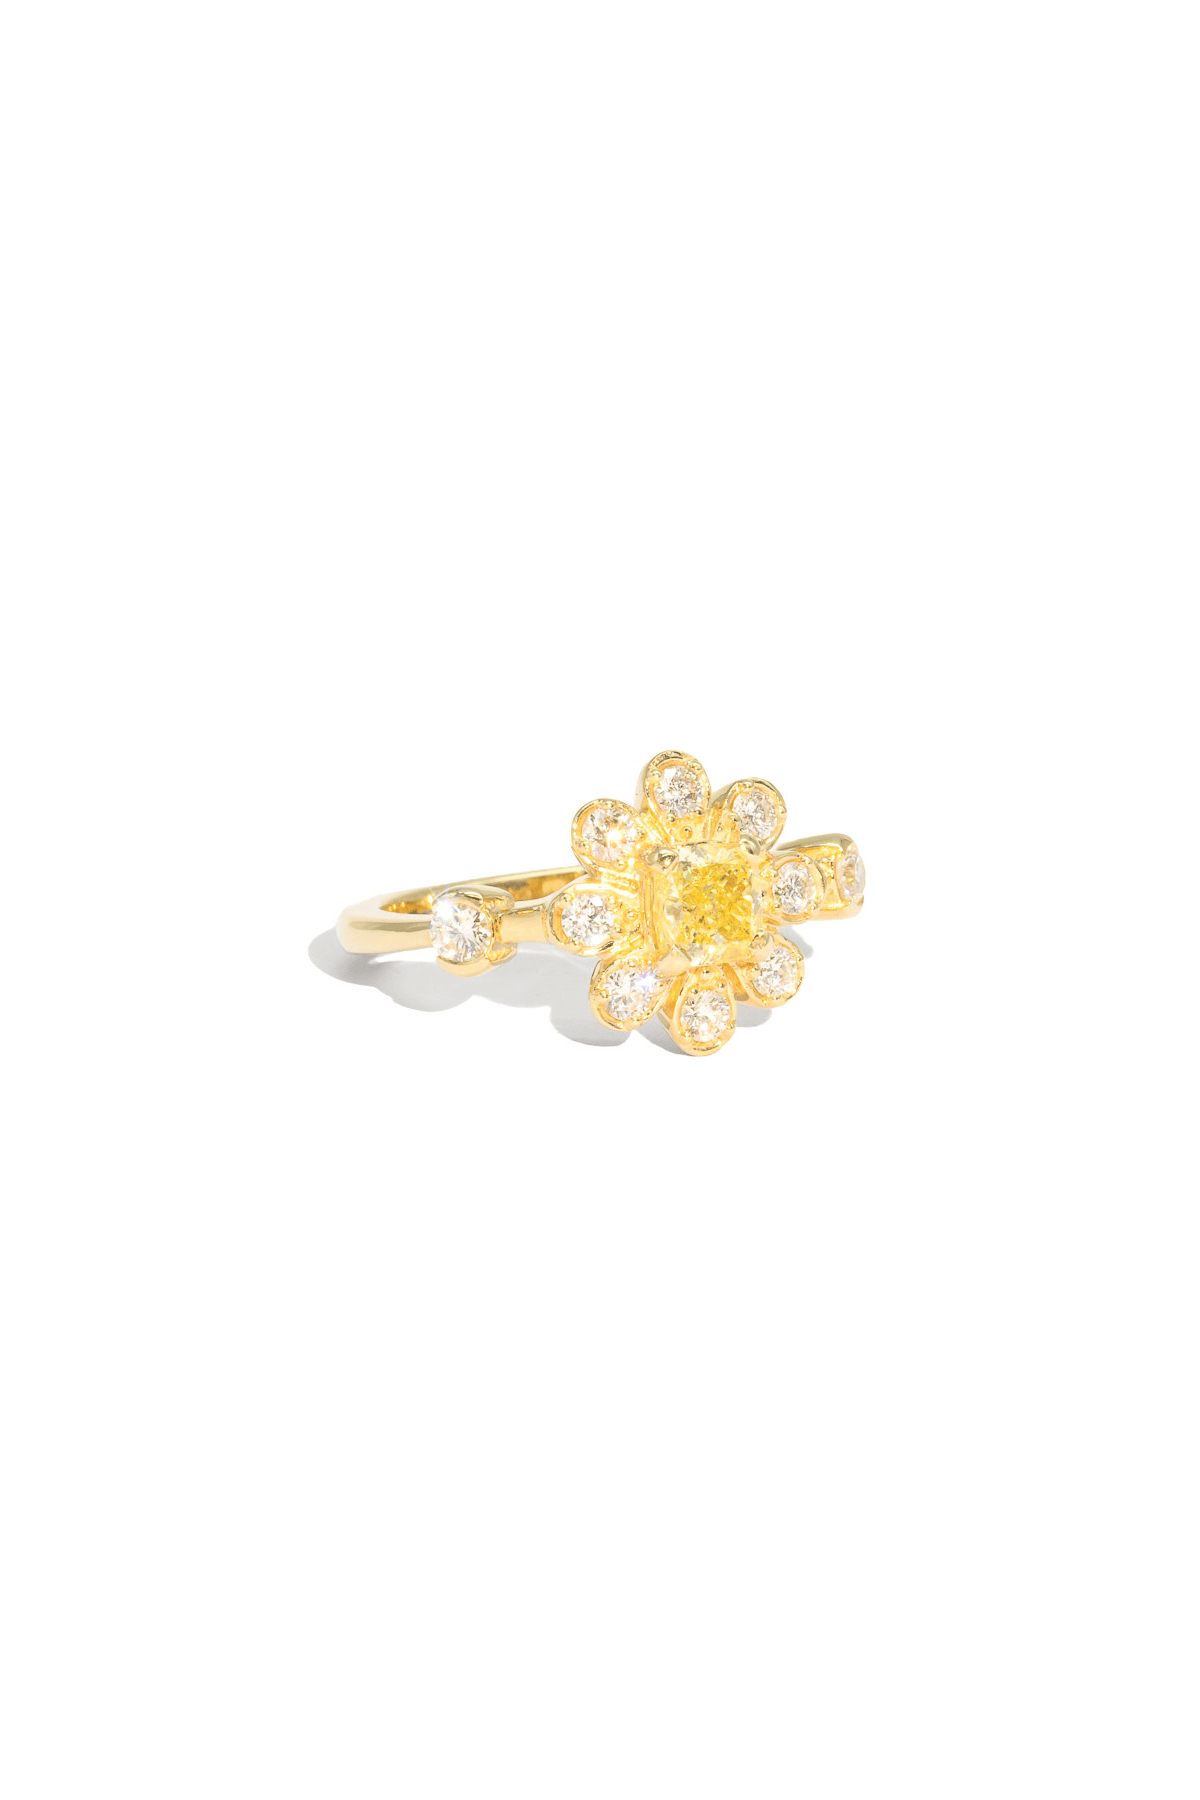 The Flora Ring with 1ct Cushion Yellow Diamond - Molten Store